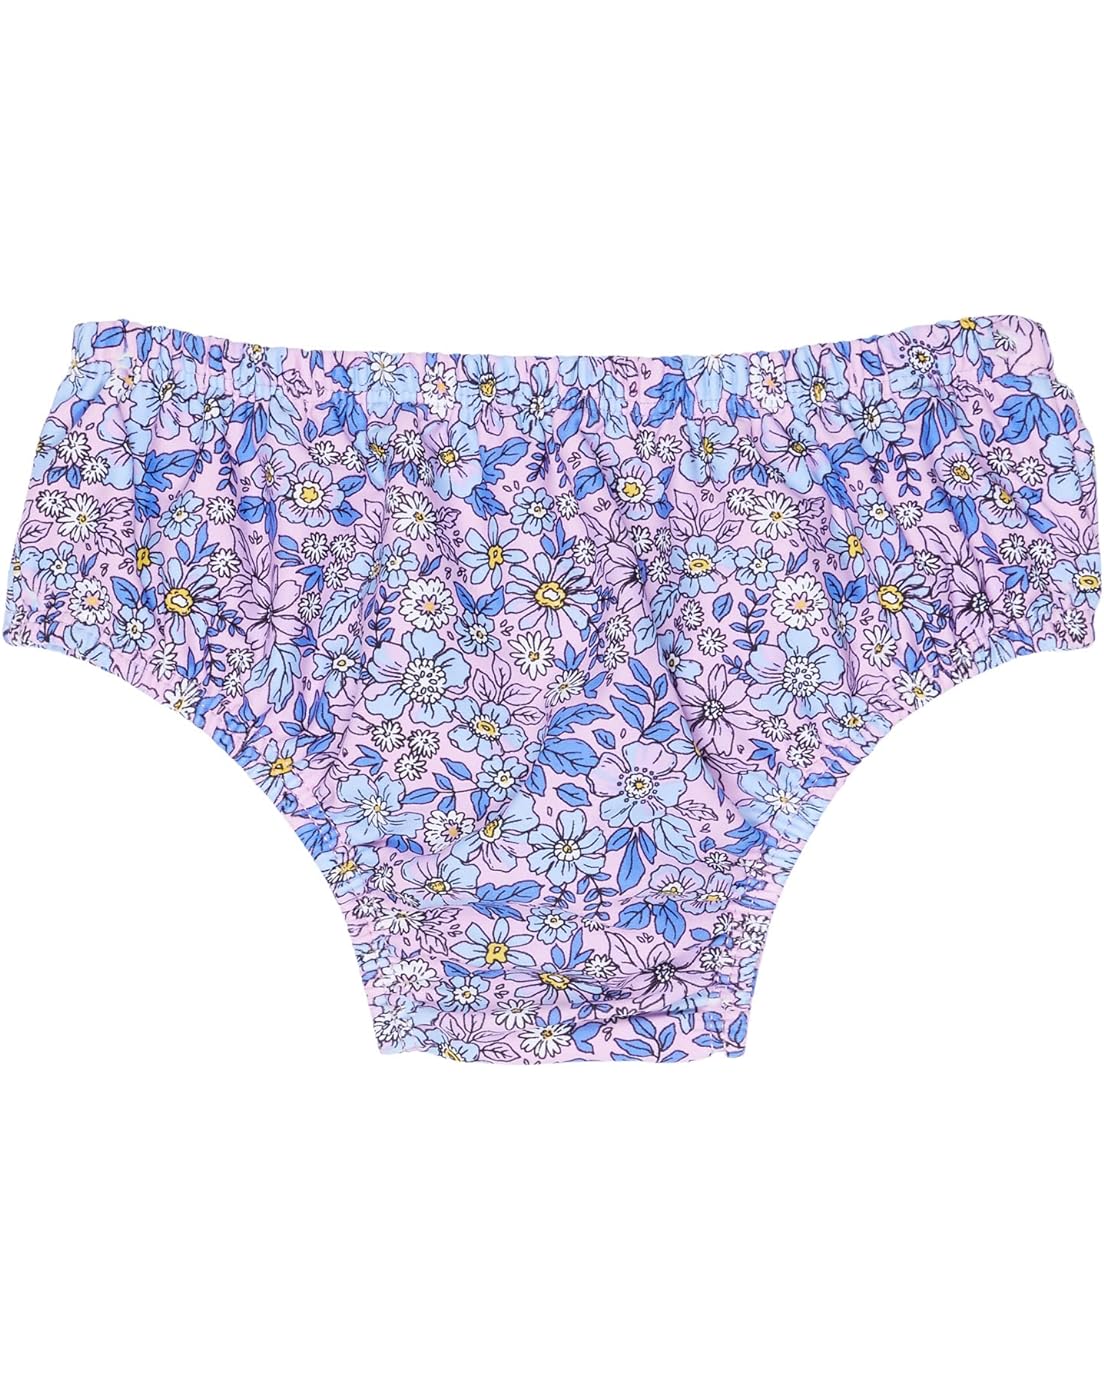  shade critters Diaper Cover - Purple Ditsy Floral (Infant)